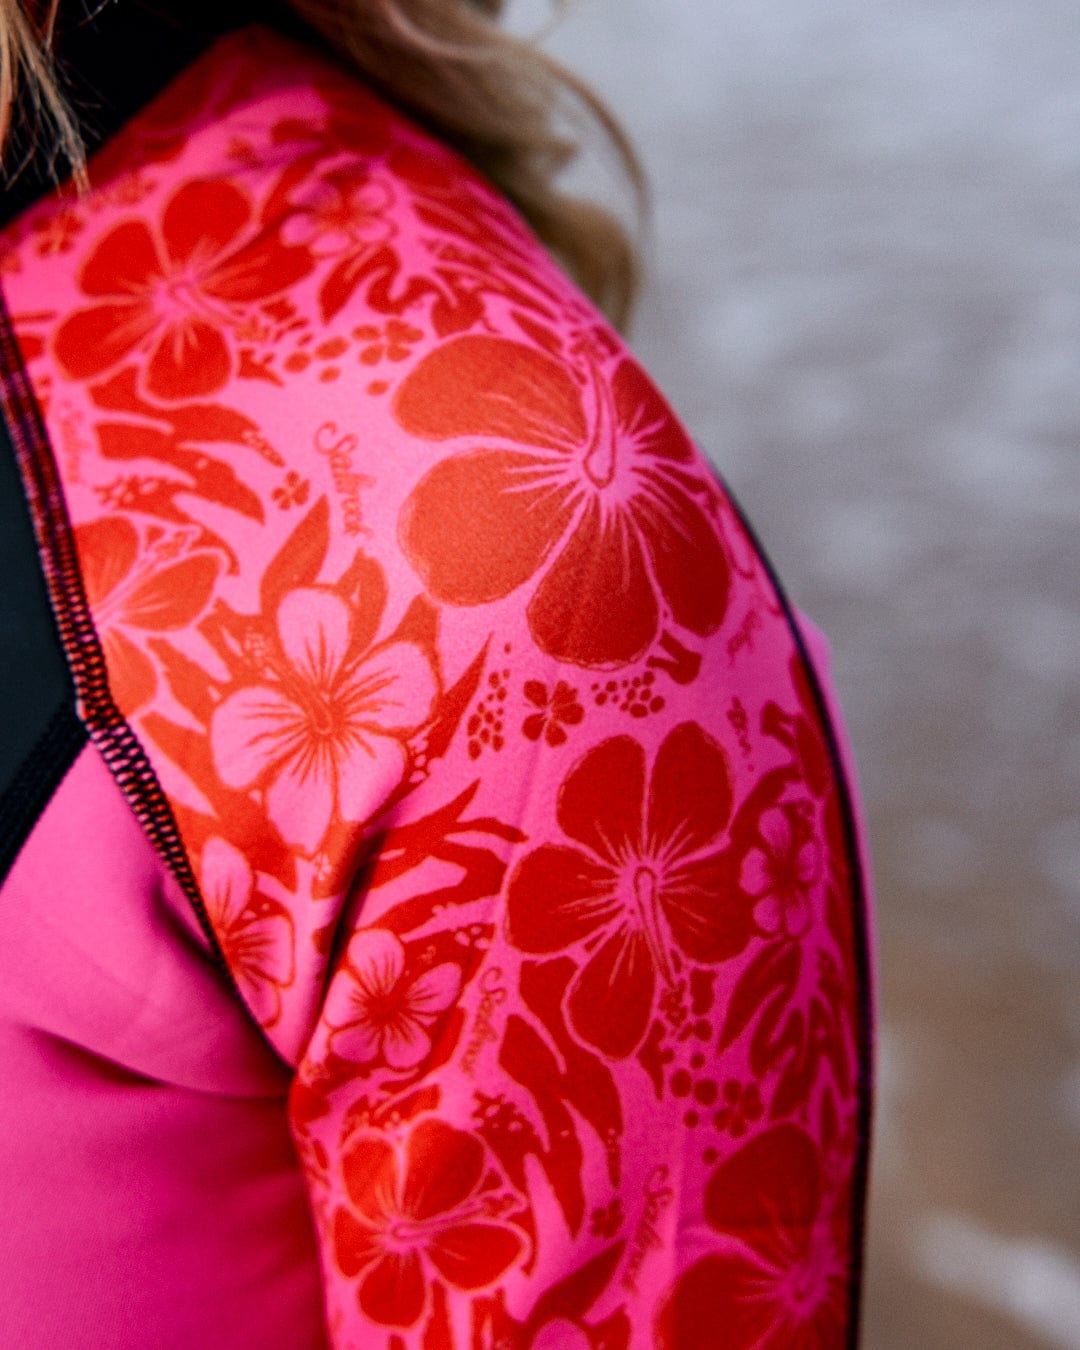 Close-up view of a person wearing a bright pink neoprene wetsuit with a Saltrock - Womens Full Wetsuit - Pink on the sleeve.